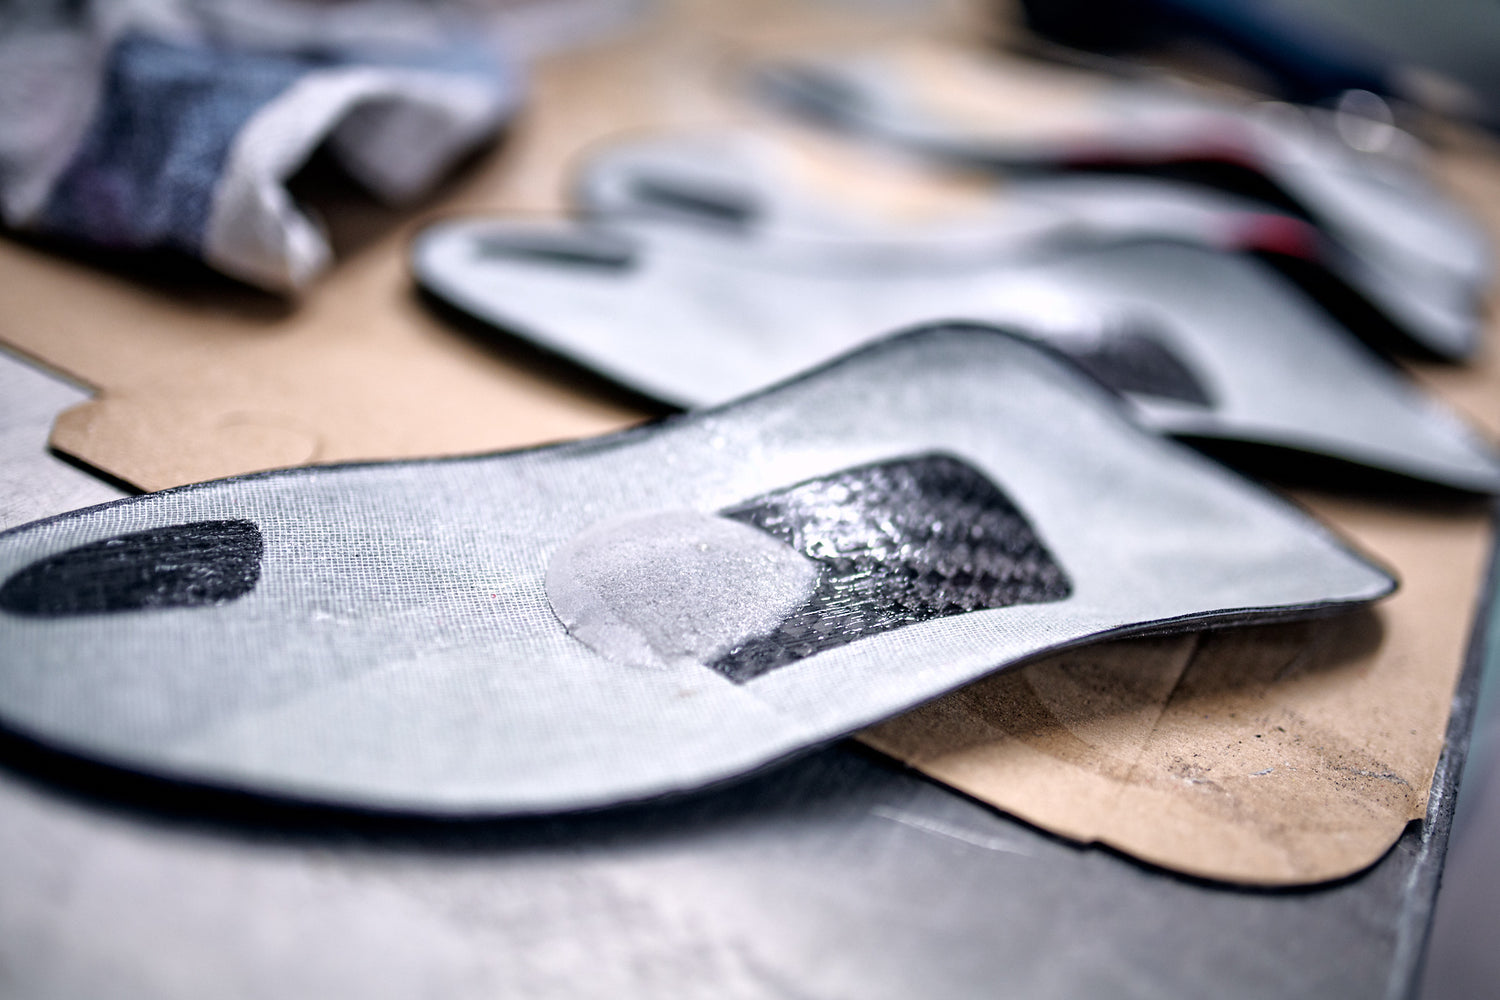 SOLESTAR insoles laying on a table and showing their build up-close.